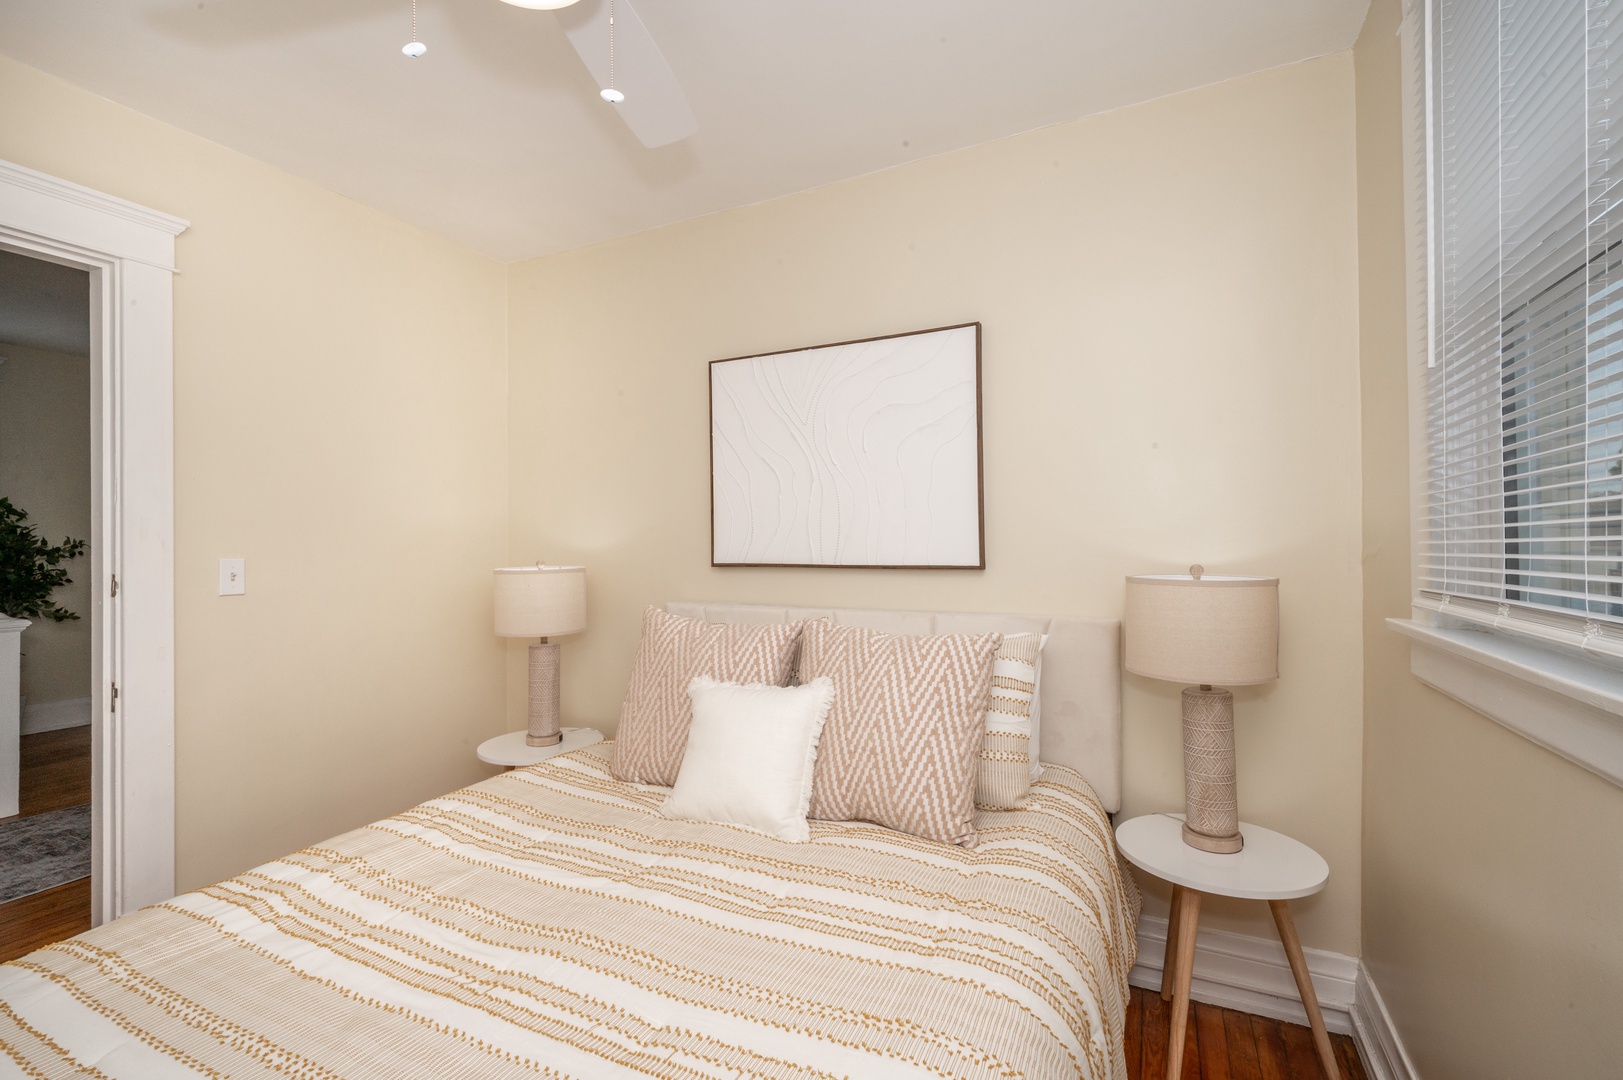 The 2nd of 3 bedrooms offers a queen bed & ceiling fan